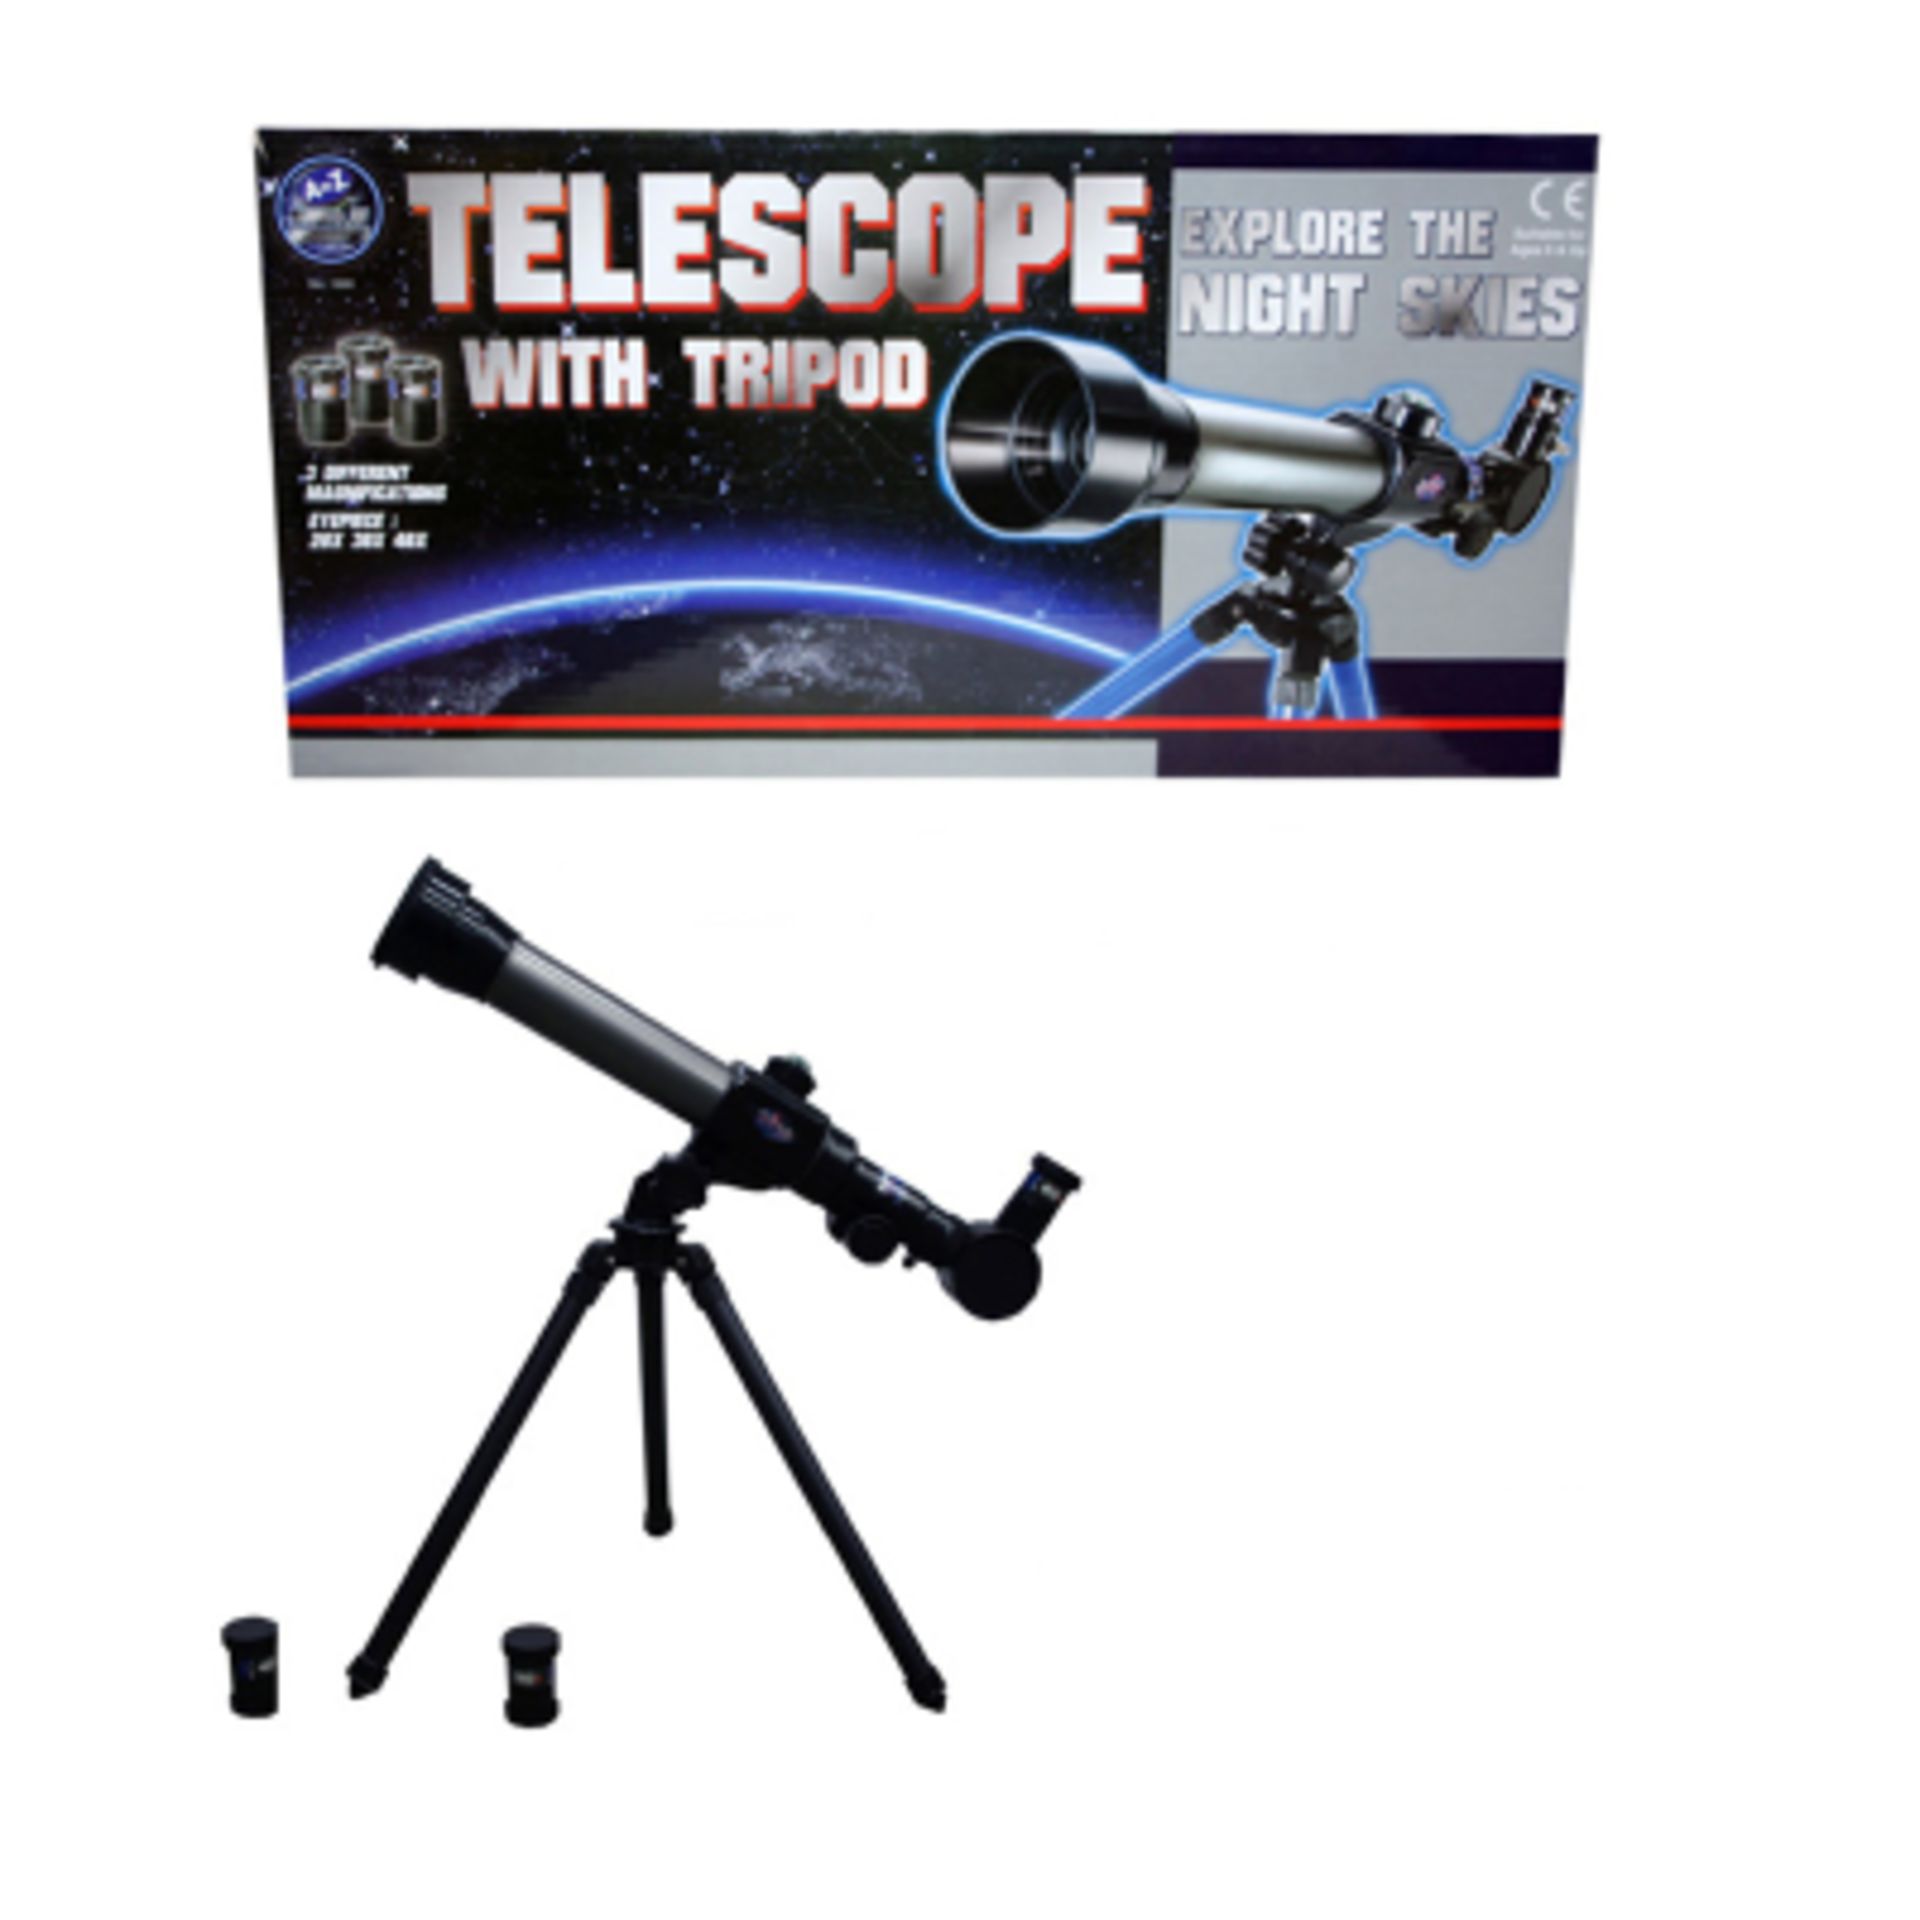 V Brand New Telescope With Tripod - Three Different Magnification Lenses